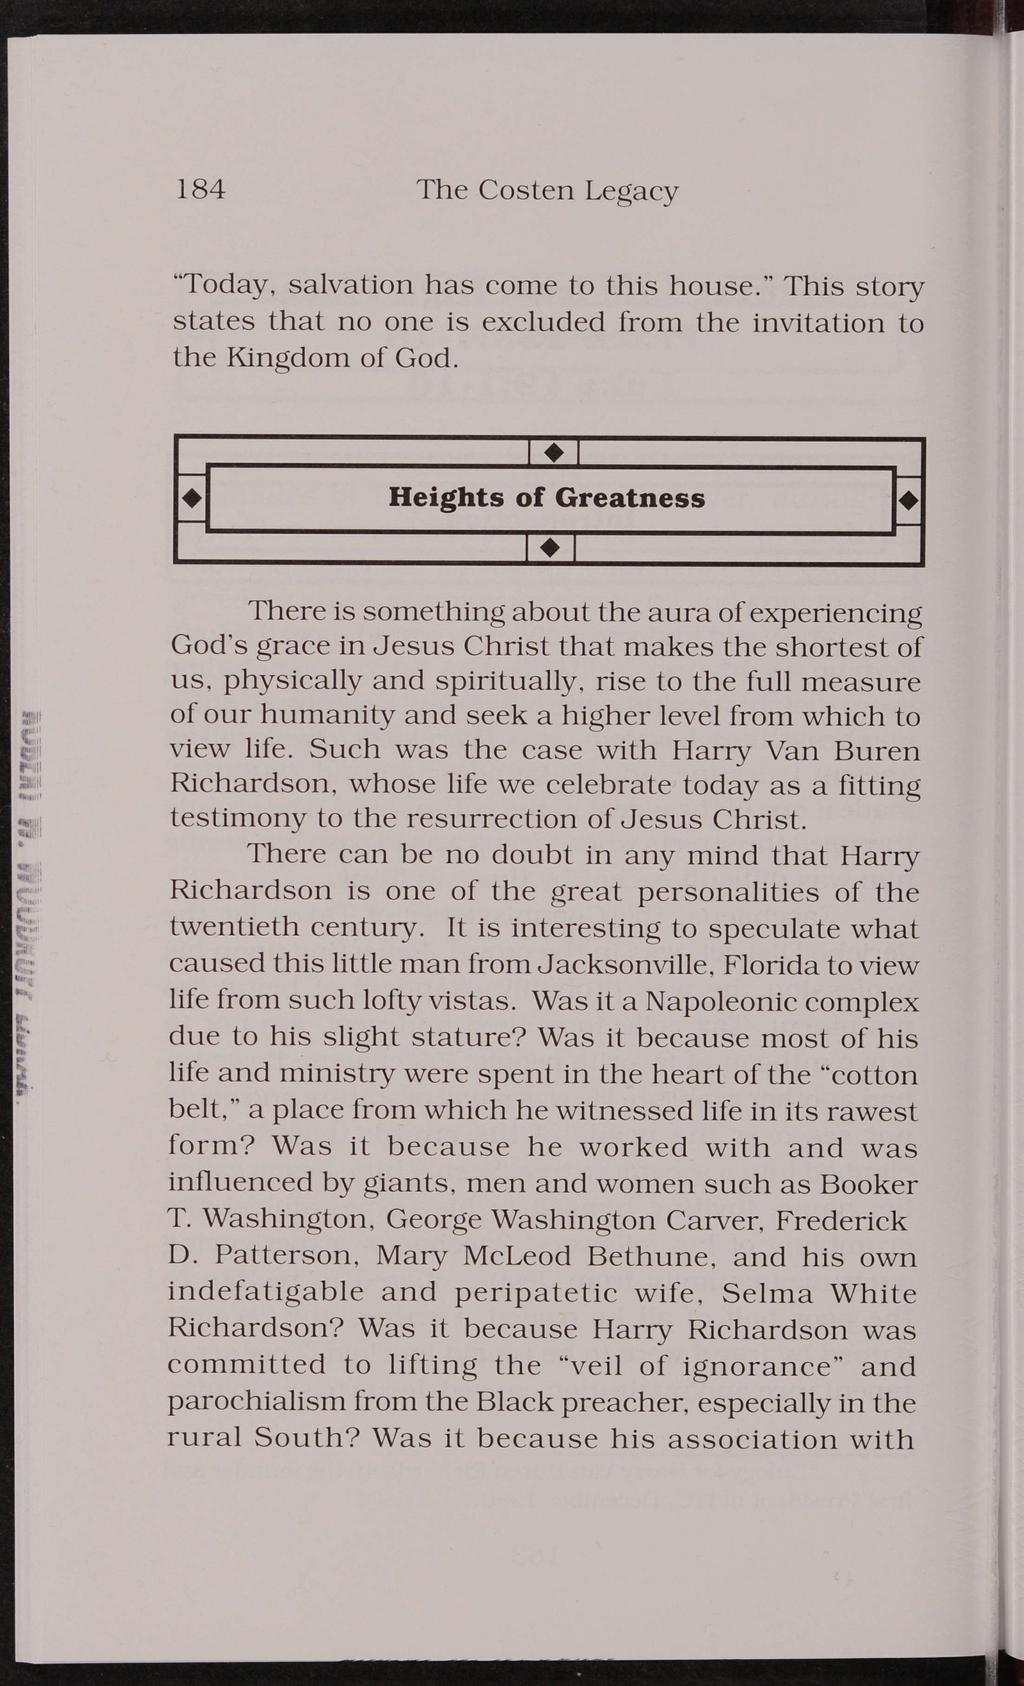 - ' ; ;? - Journal of the Interdenominational Theological Center, Vol. 24 [1996], Iss. 1, Art. 8 184 The Costen Legacy Today, salvation has come to this house.